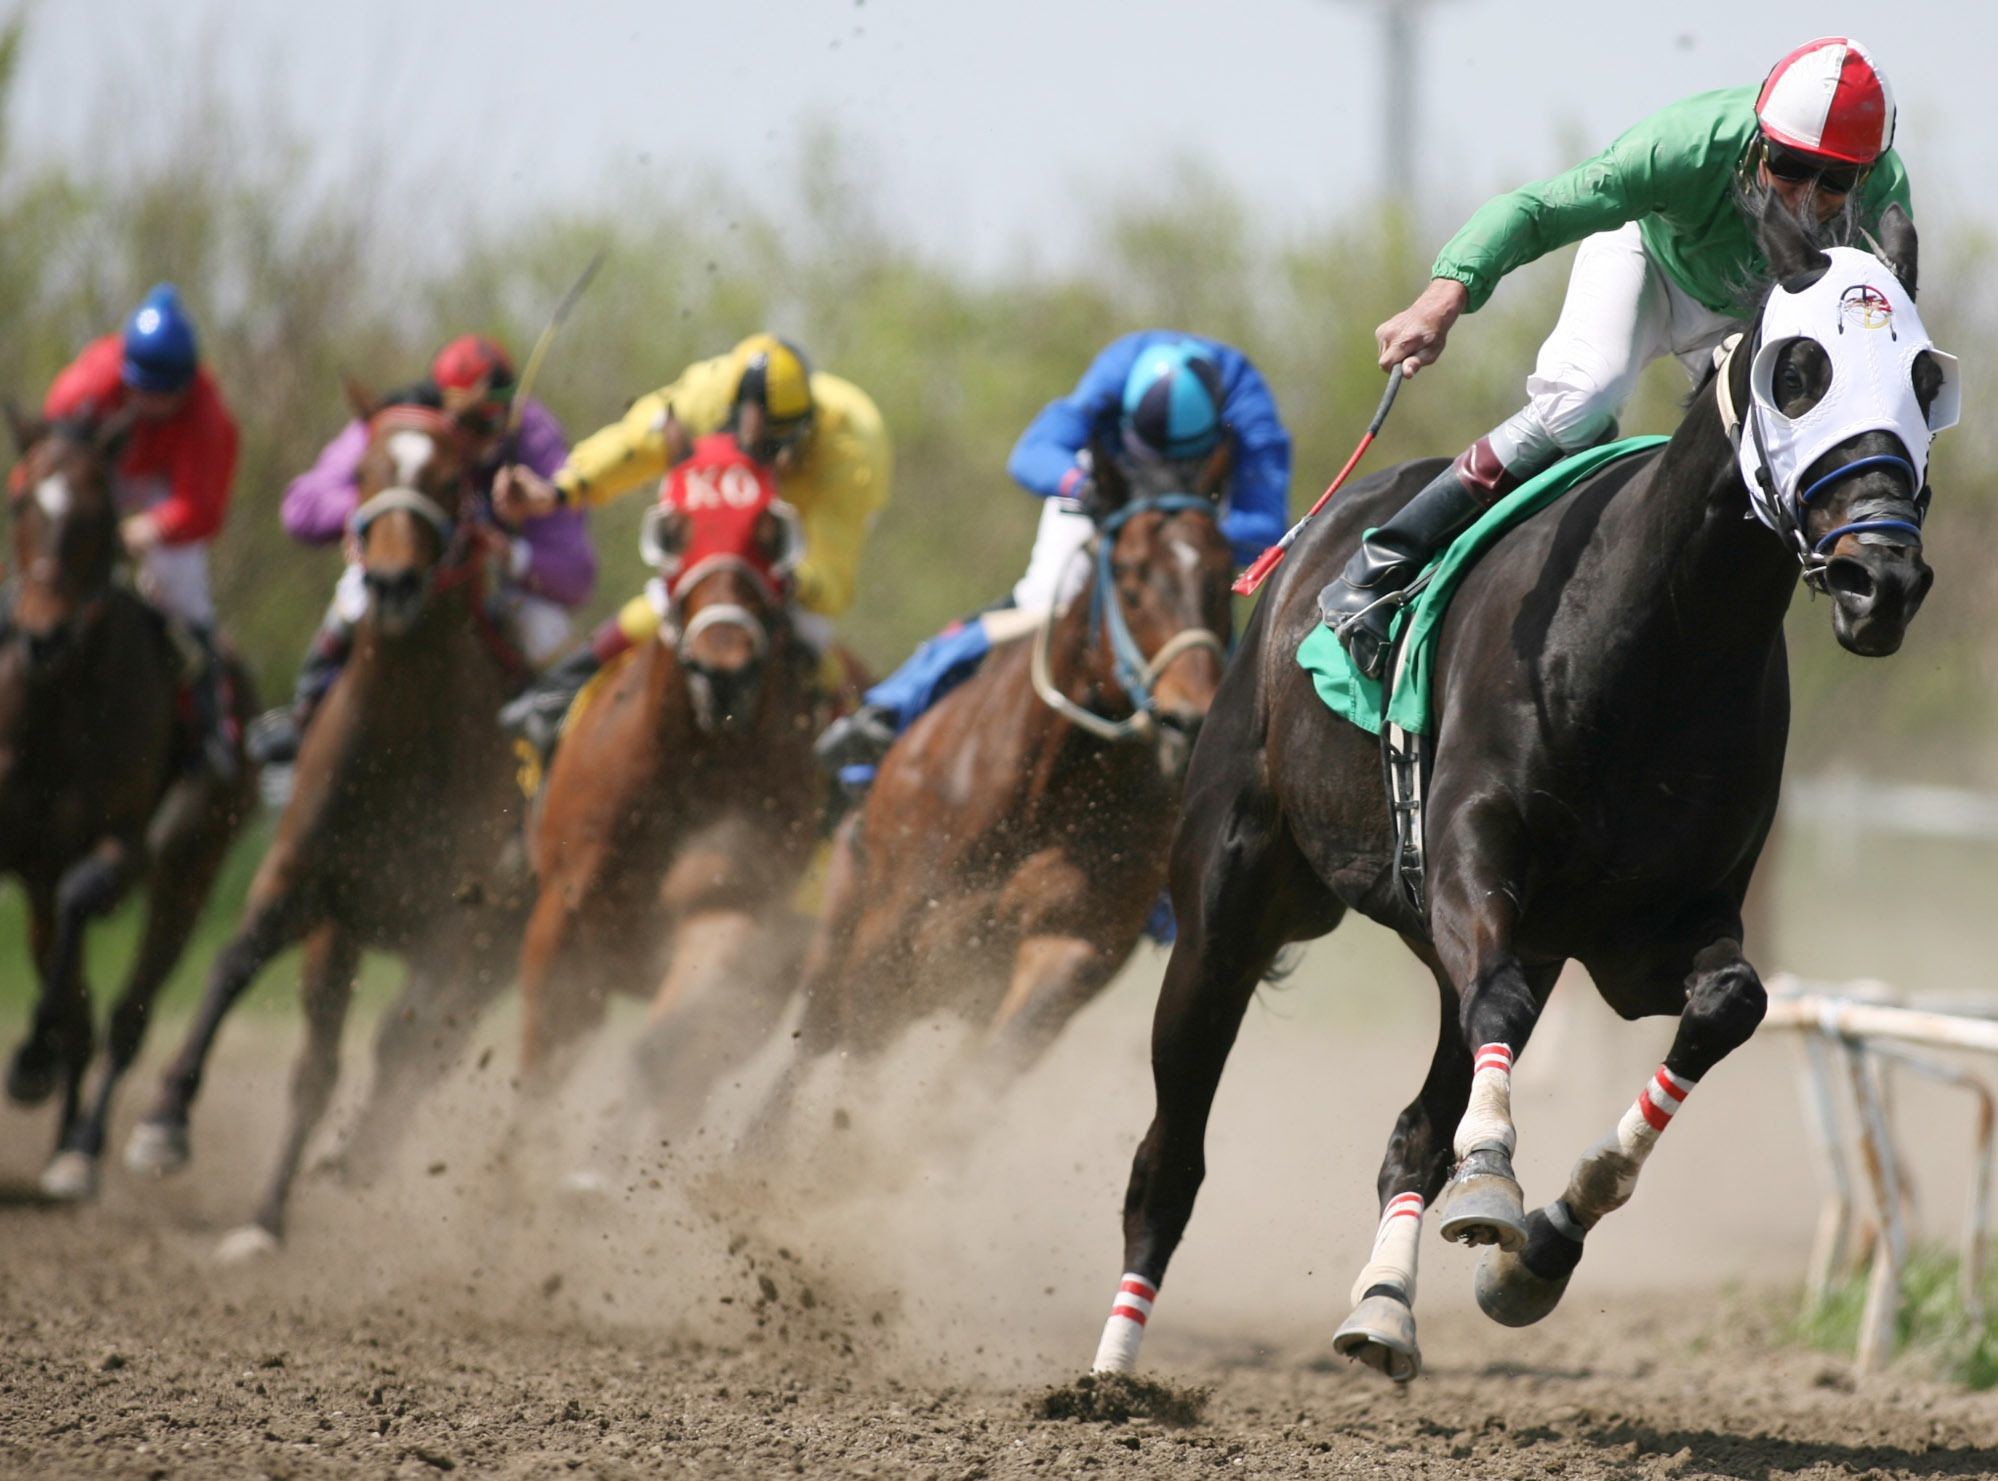 1998x1481 Horse Racing Wallpapers. Animal Wallpapers 39 Views. Share